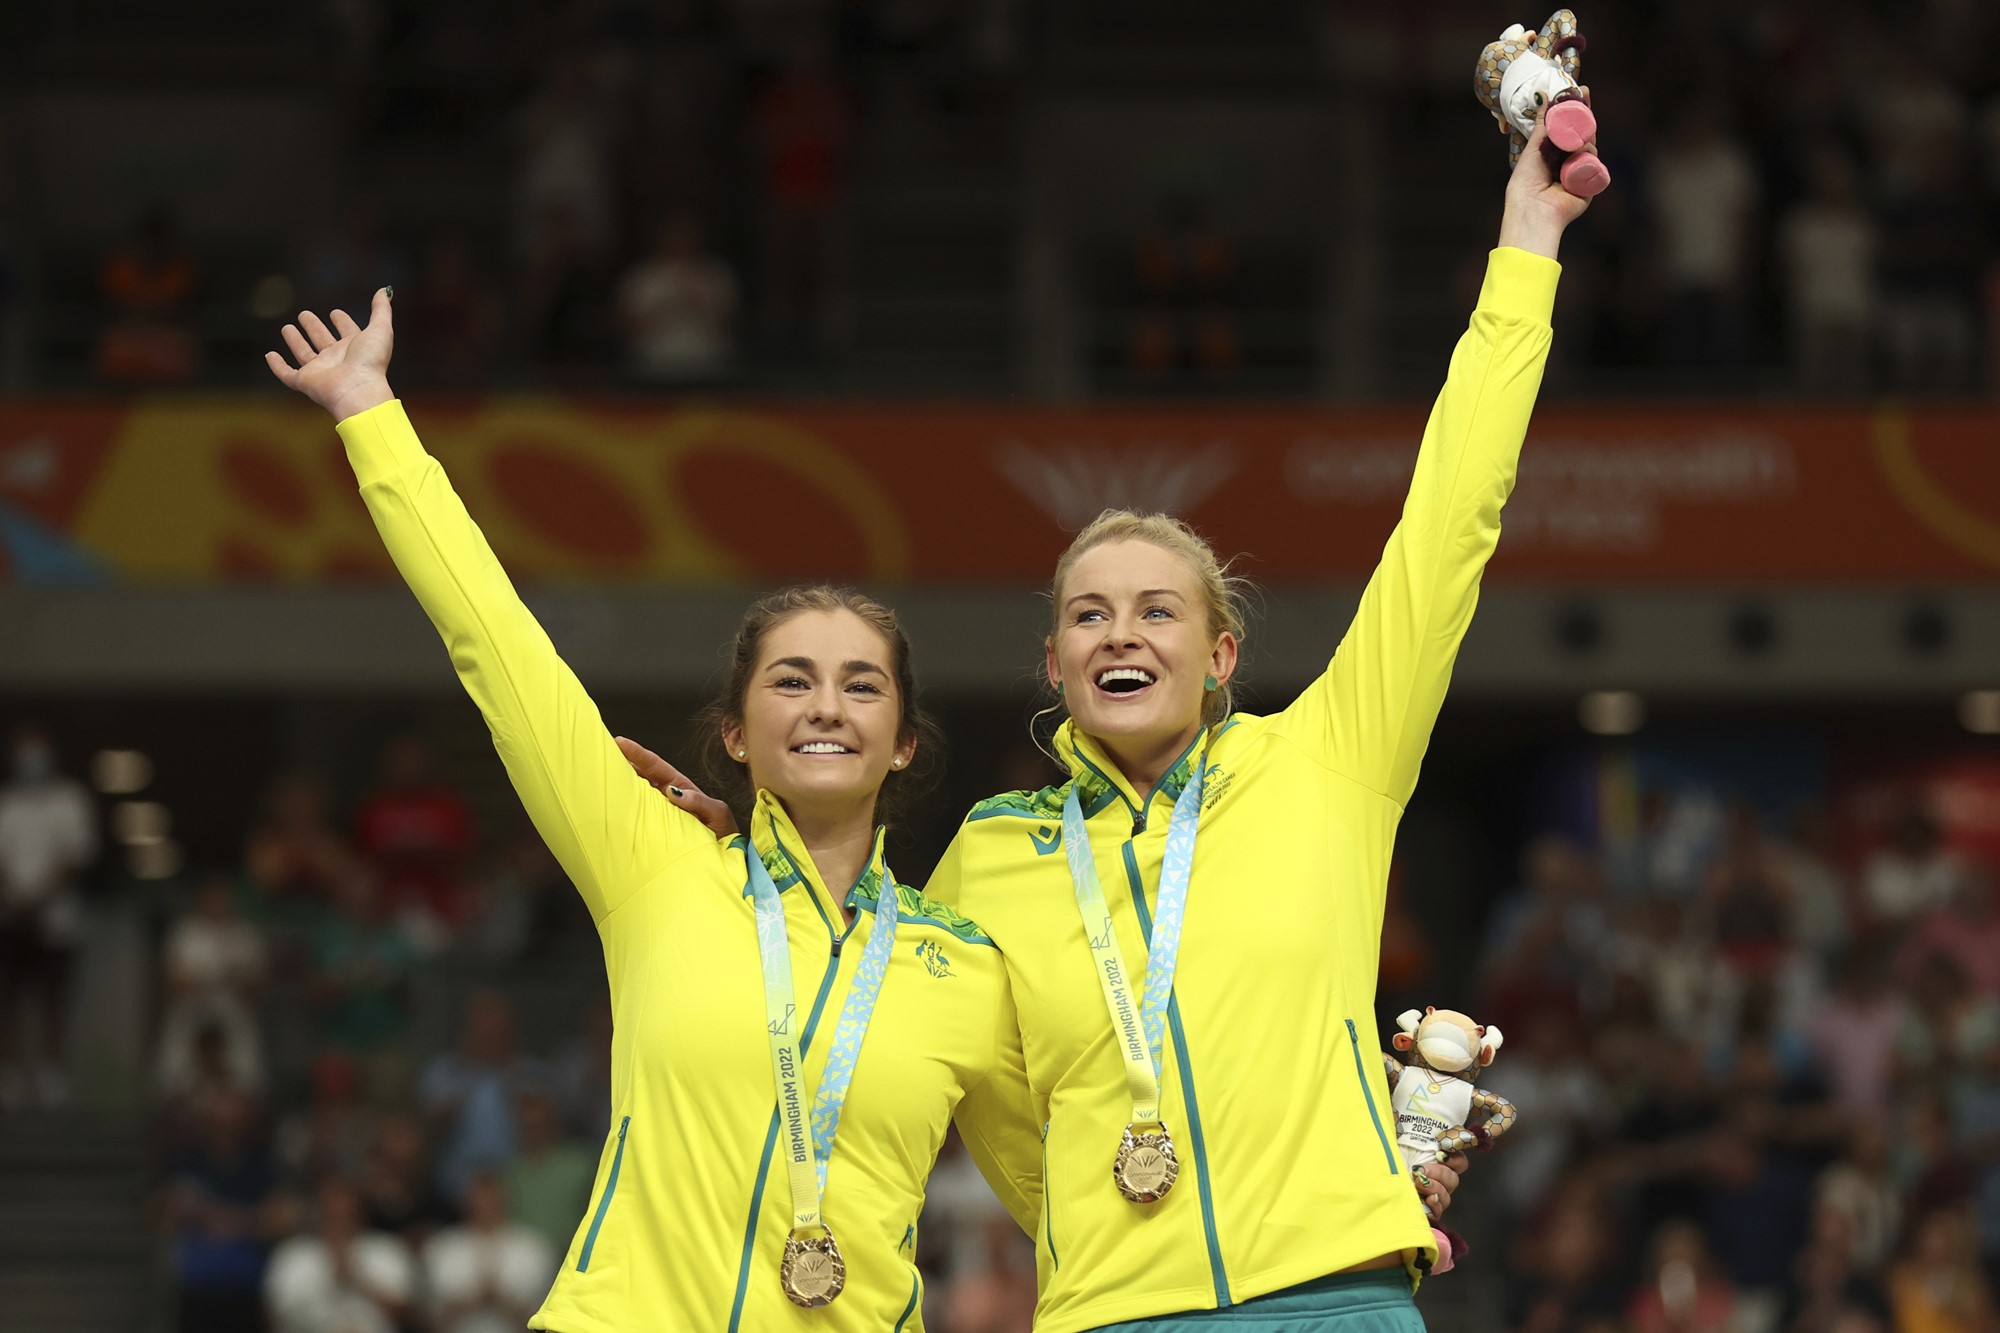 Two Australian athletes smile and wave gold medals on a podium